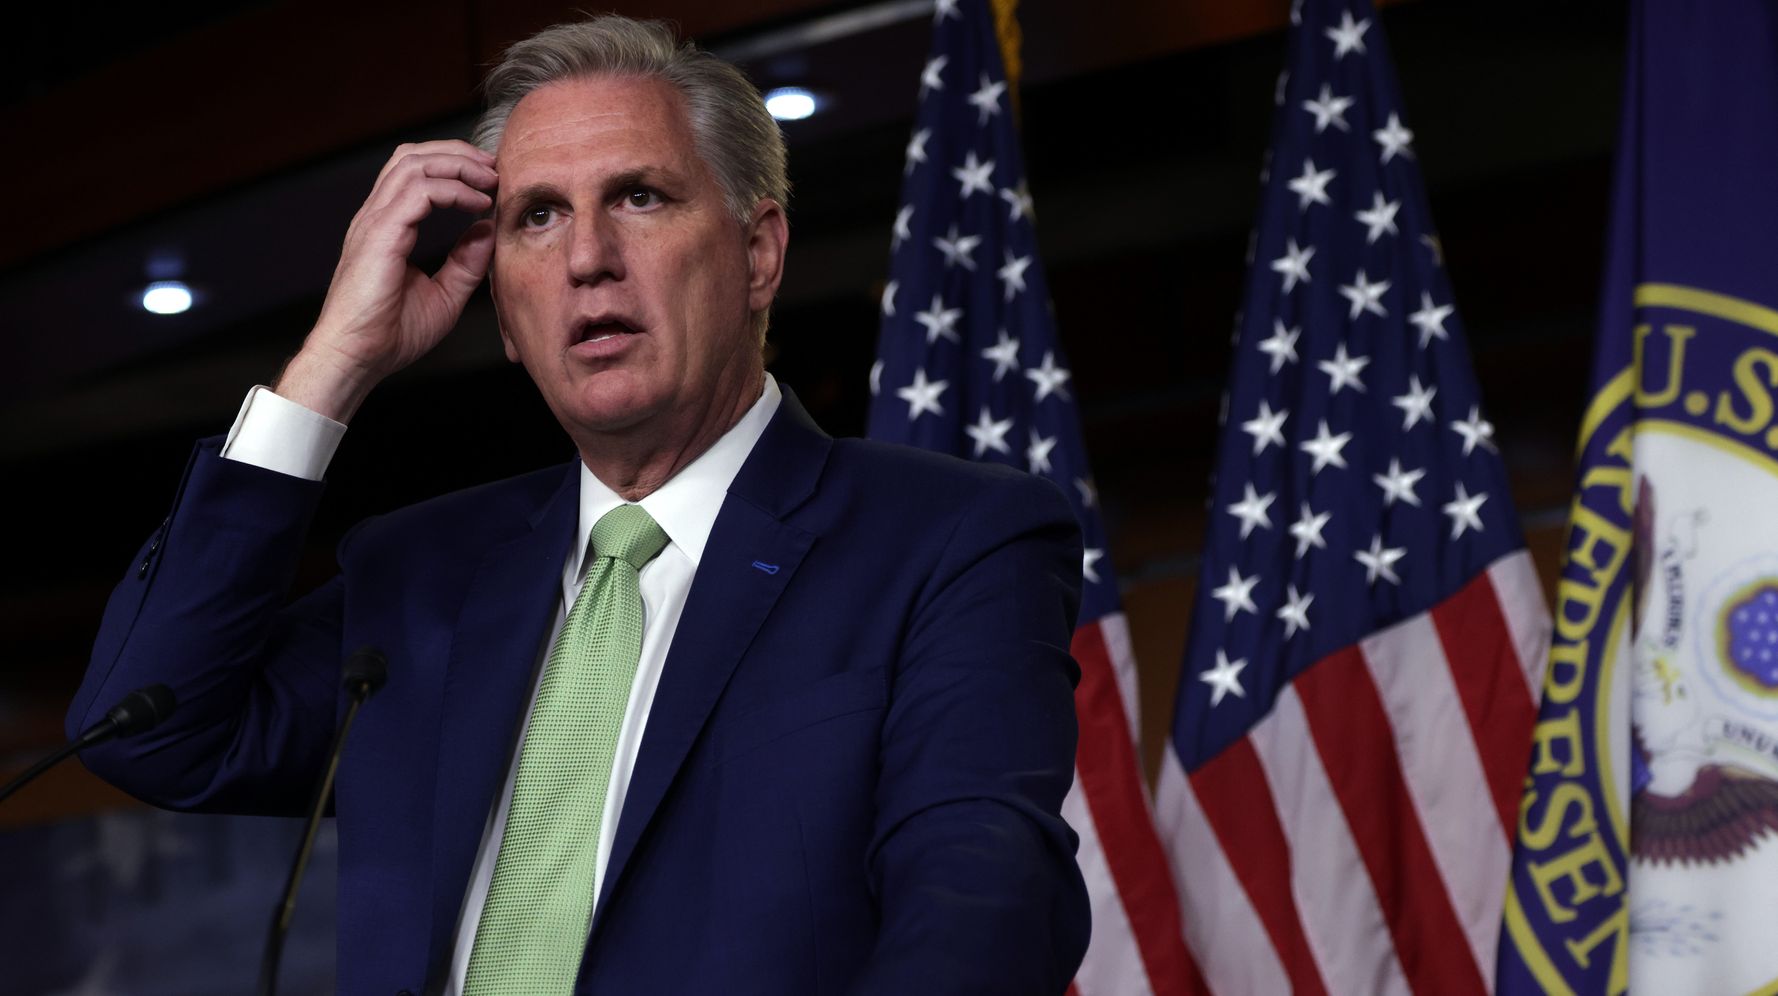 Kevin McCarthy Caught On Hot Mic Saying He's 'Had It' With Liz Cheney: Report